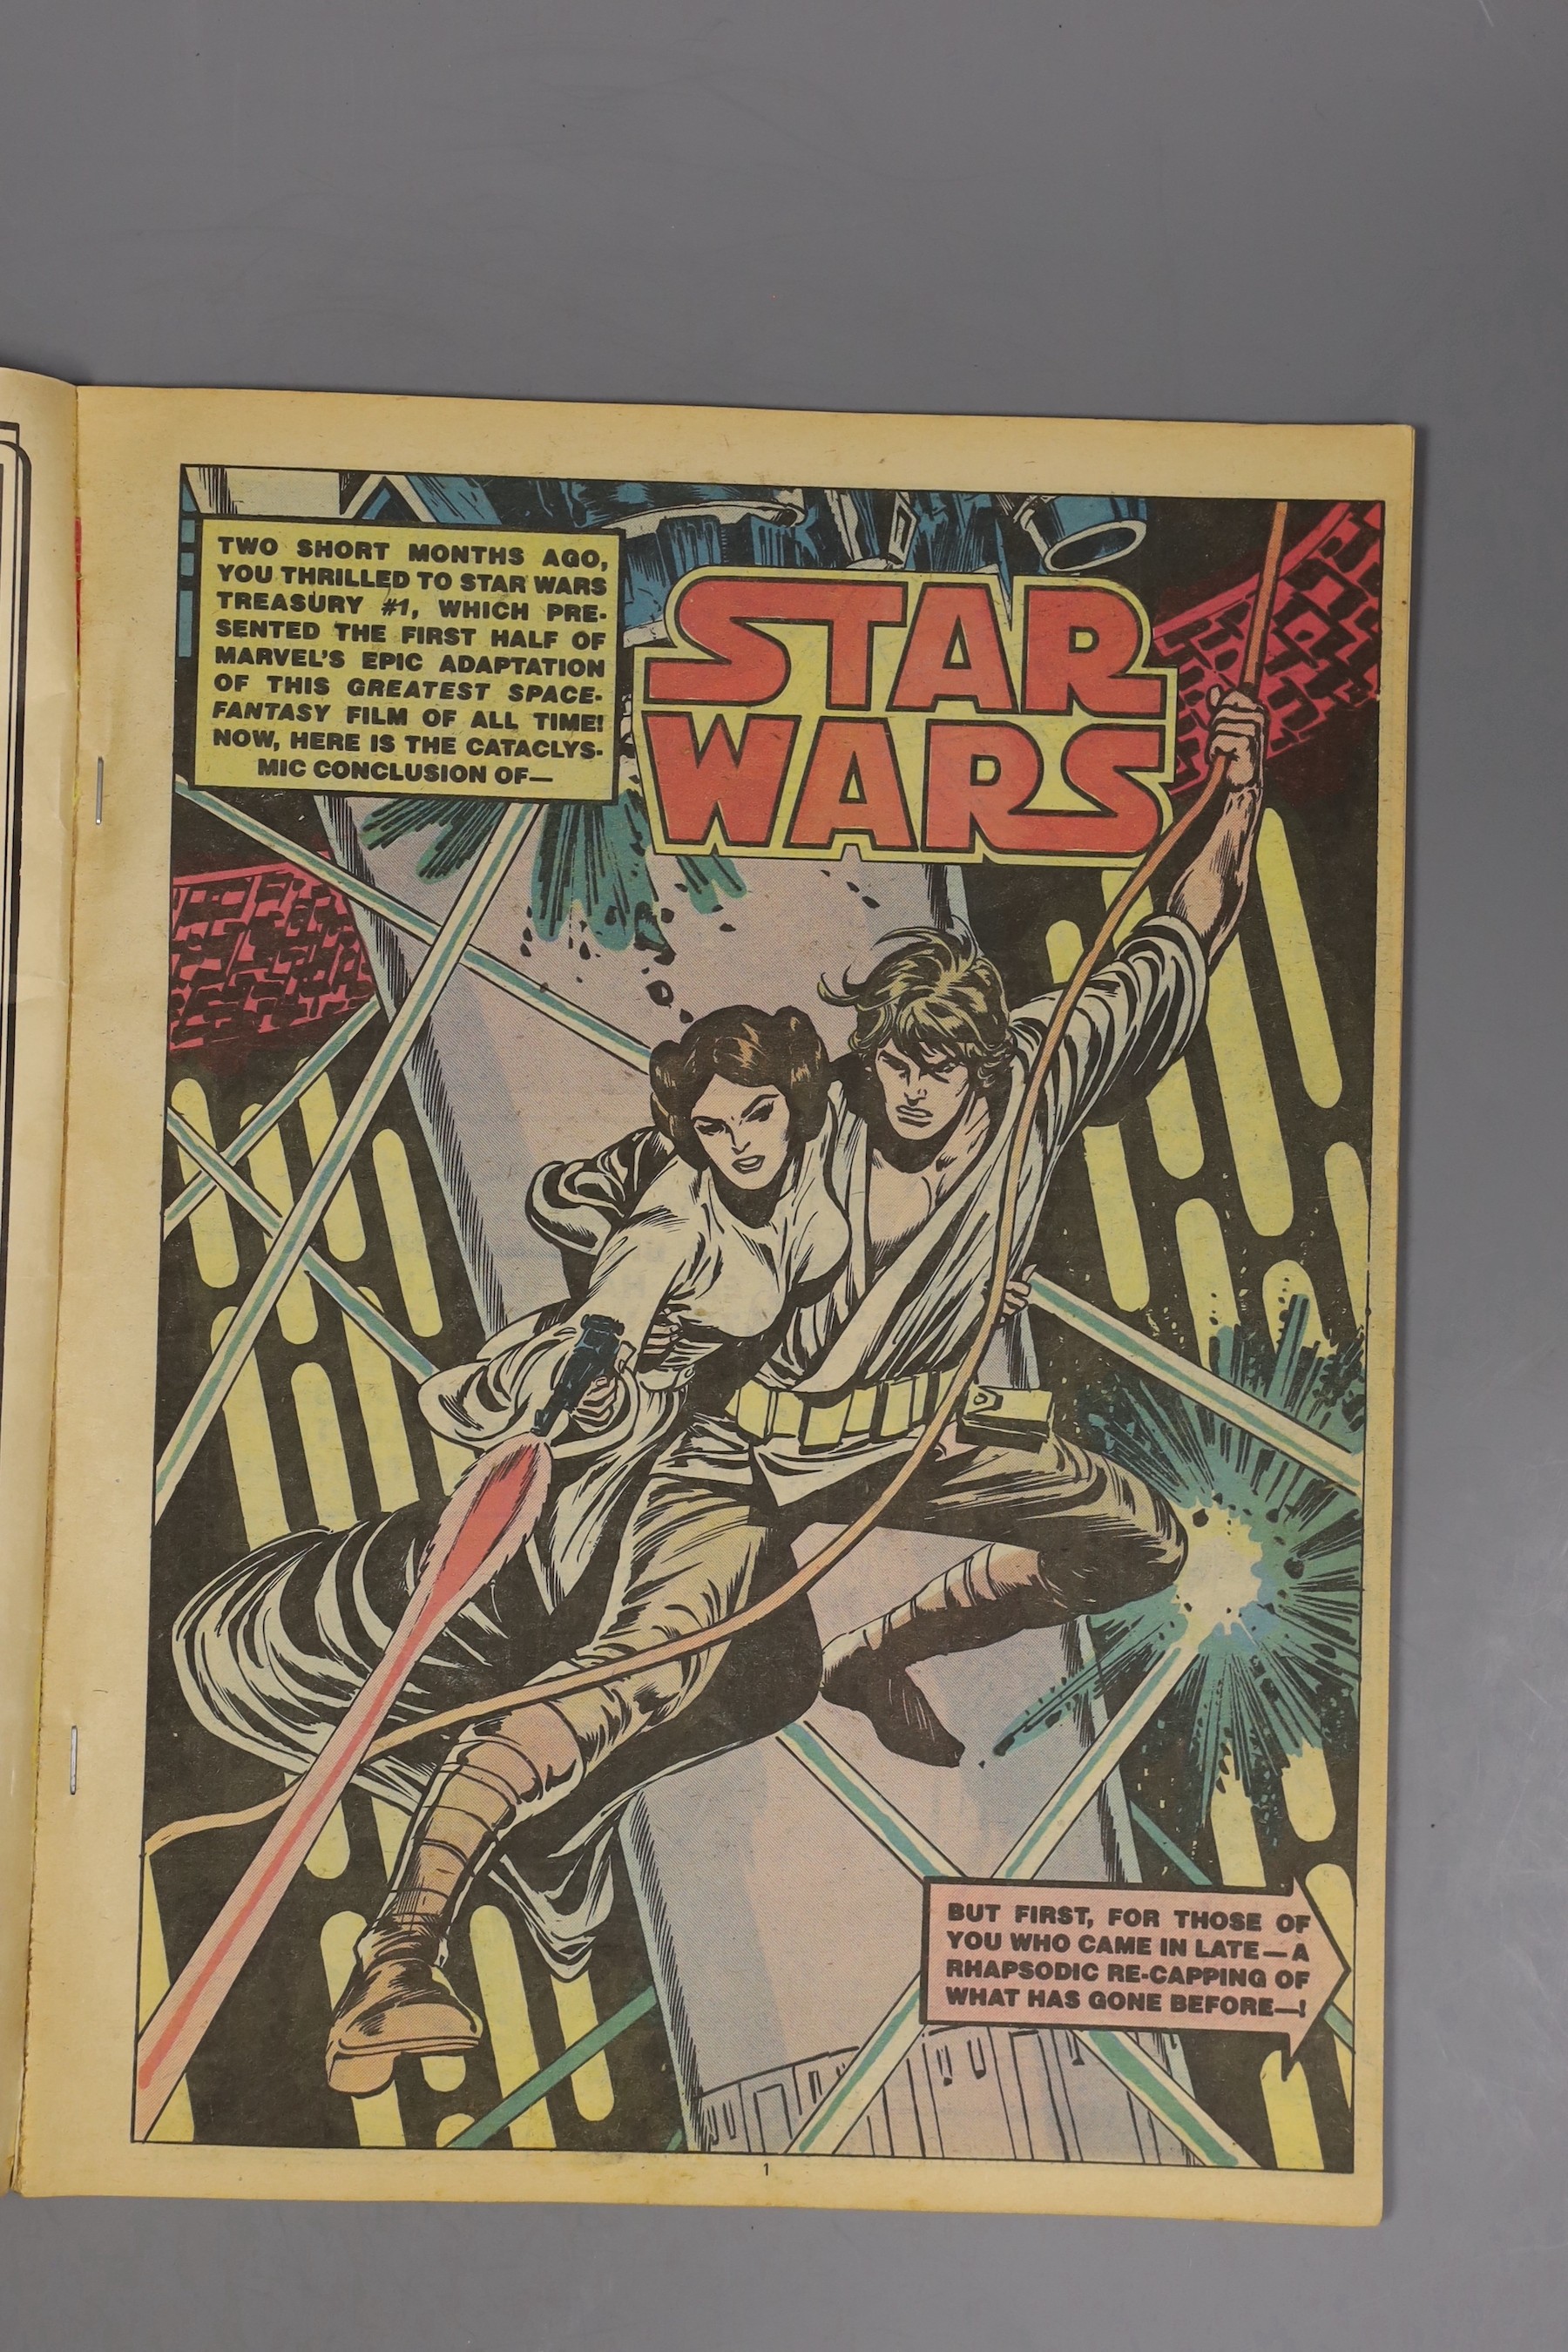 Marvel Comics Group - Marvel Special Editions of Star Wars, Vol 1, numbers 1 & 2, New York, 1977